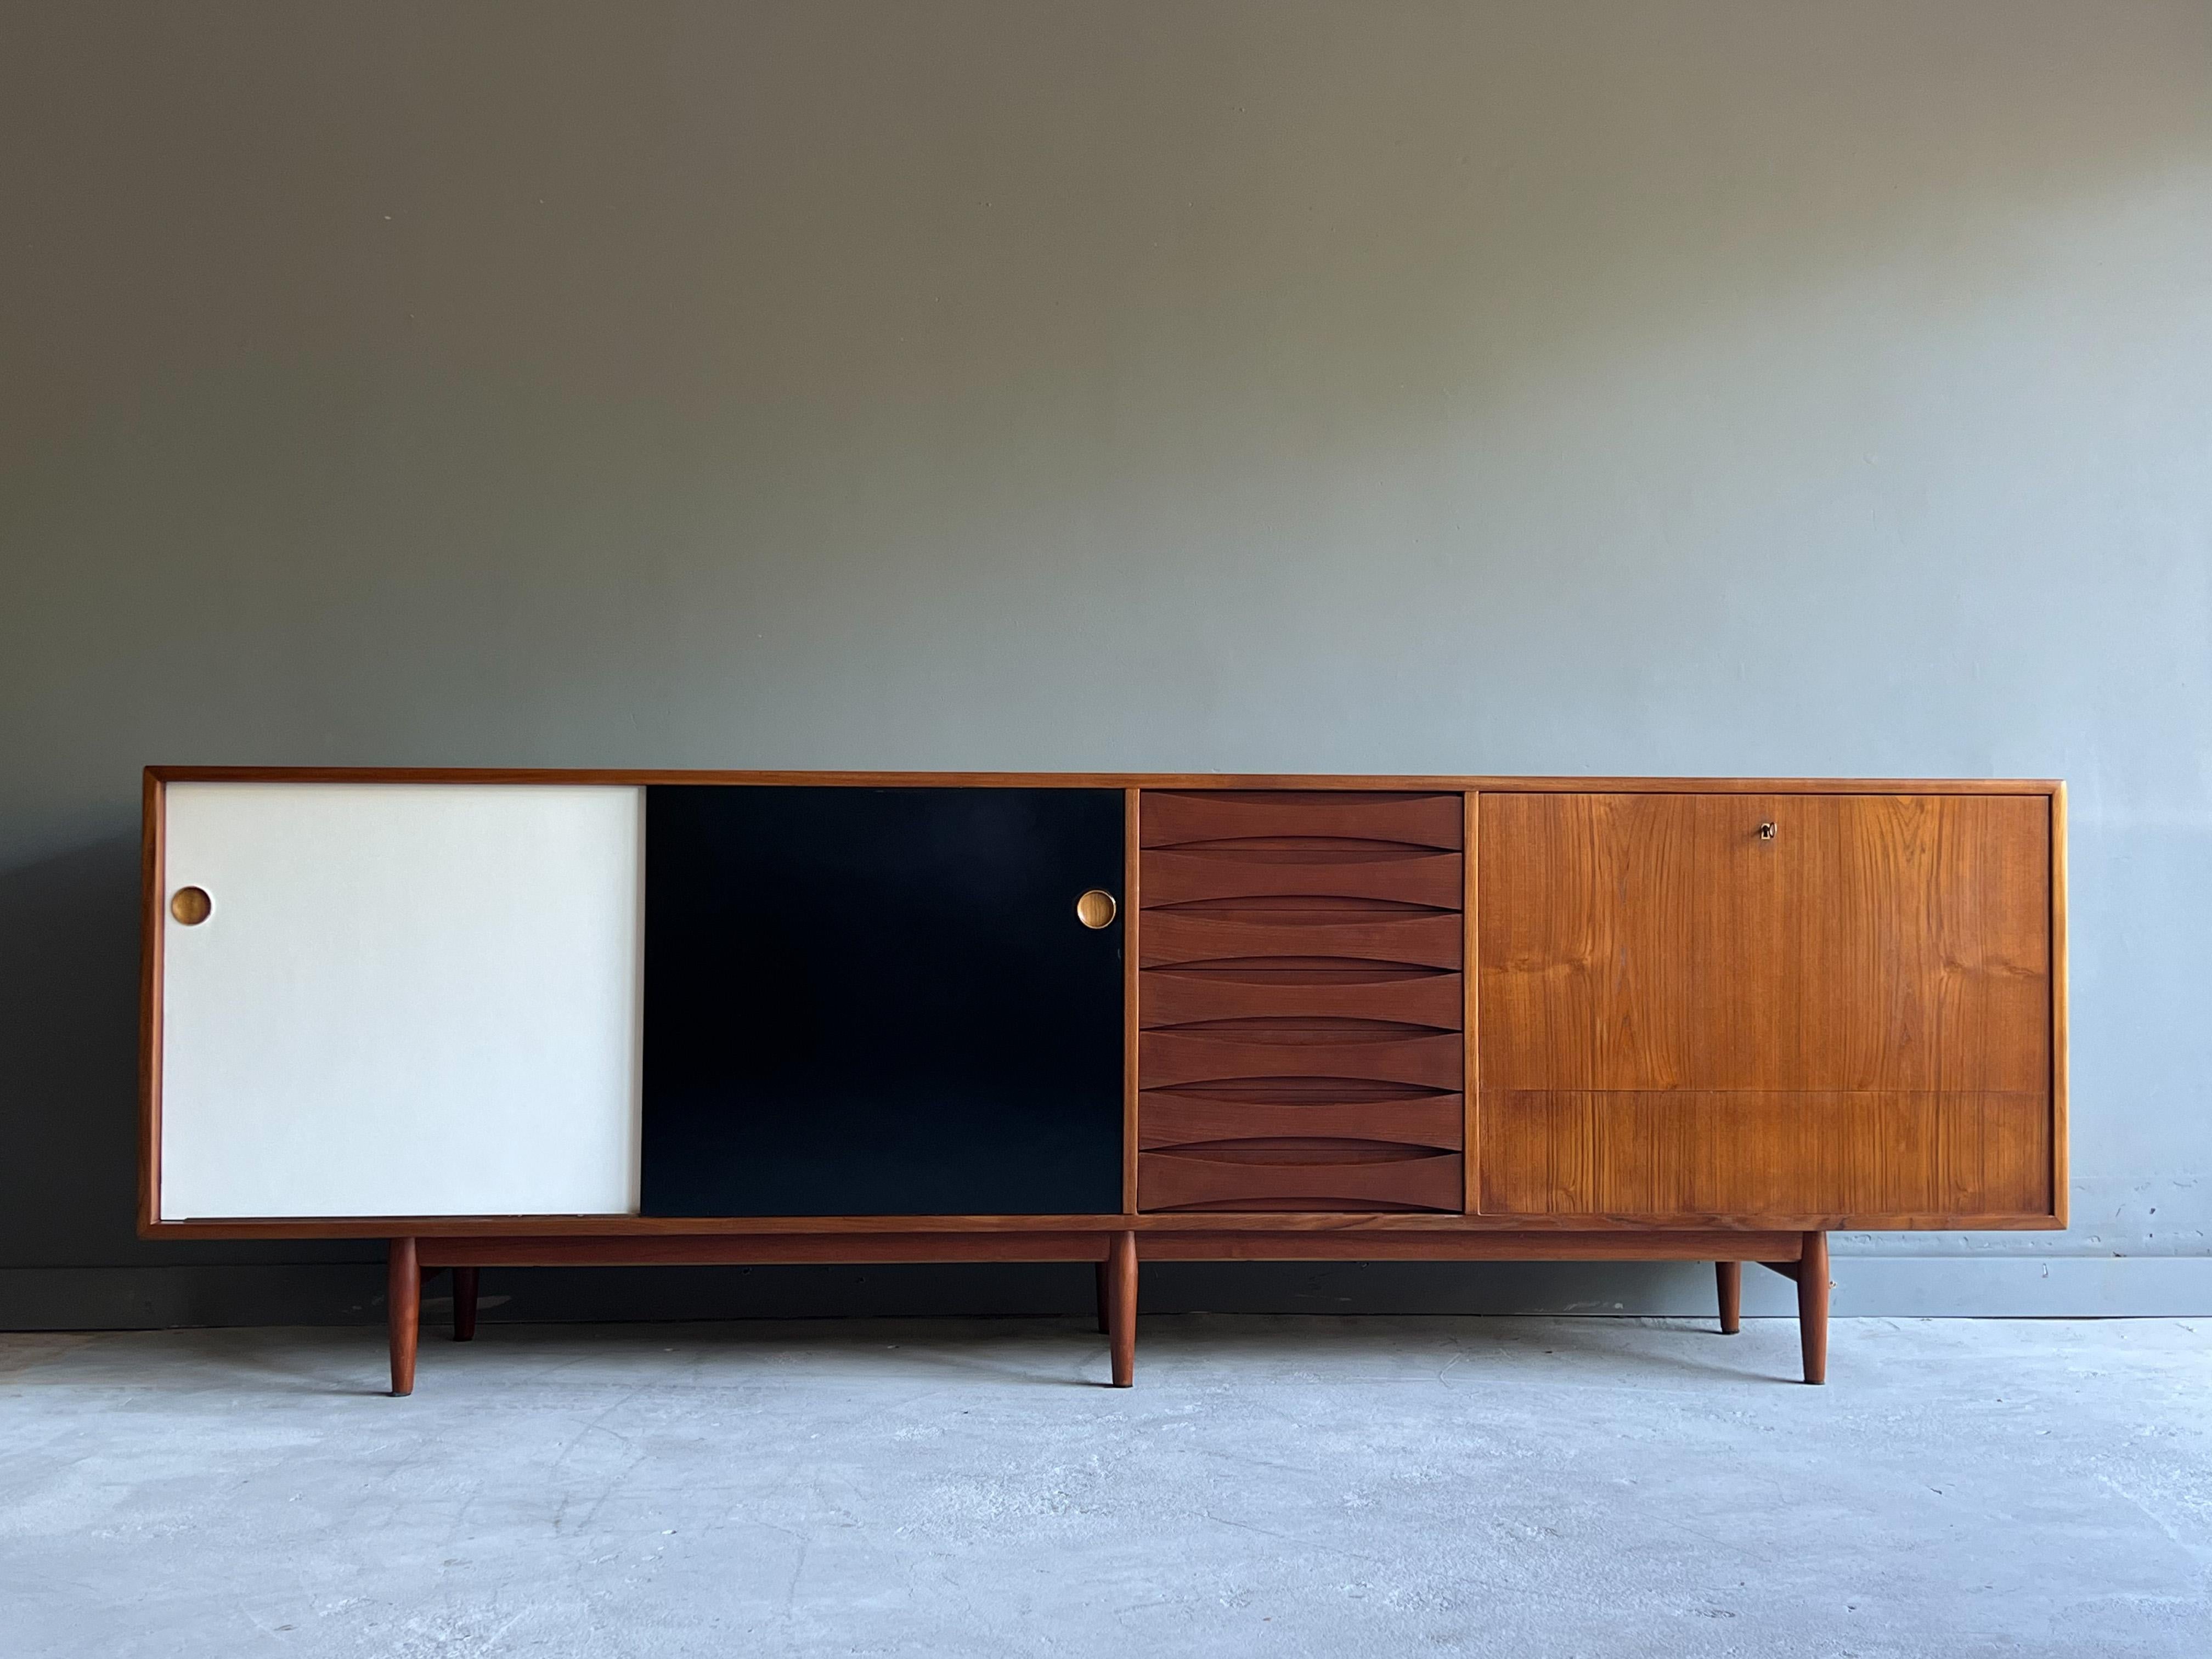 Large and uncommon Danish credenza by Arne Vodder for Sibast. This beautiful example, model 29-A, has it all. From Vodder’s signature eye lid drawer pulls, reversible lacquer doors, elegant legs and commanding scale, it’s no wonder why this design